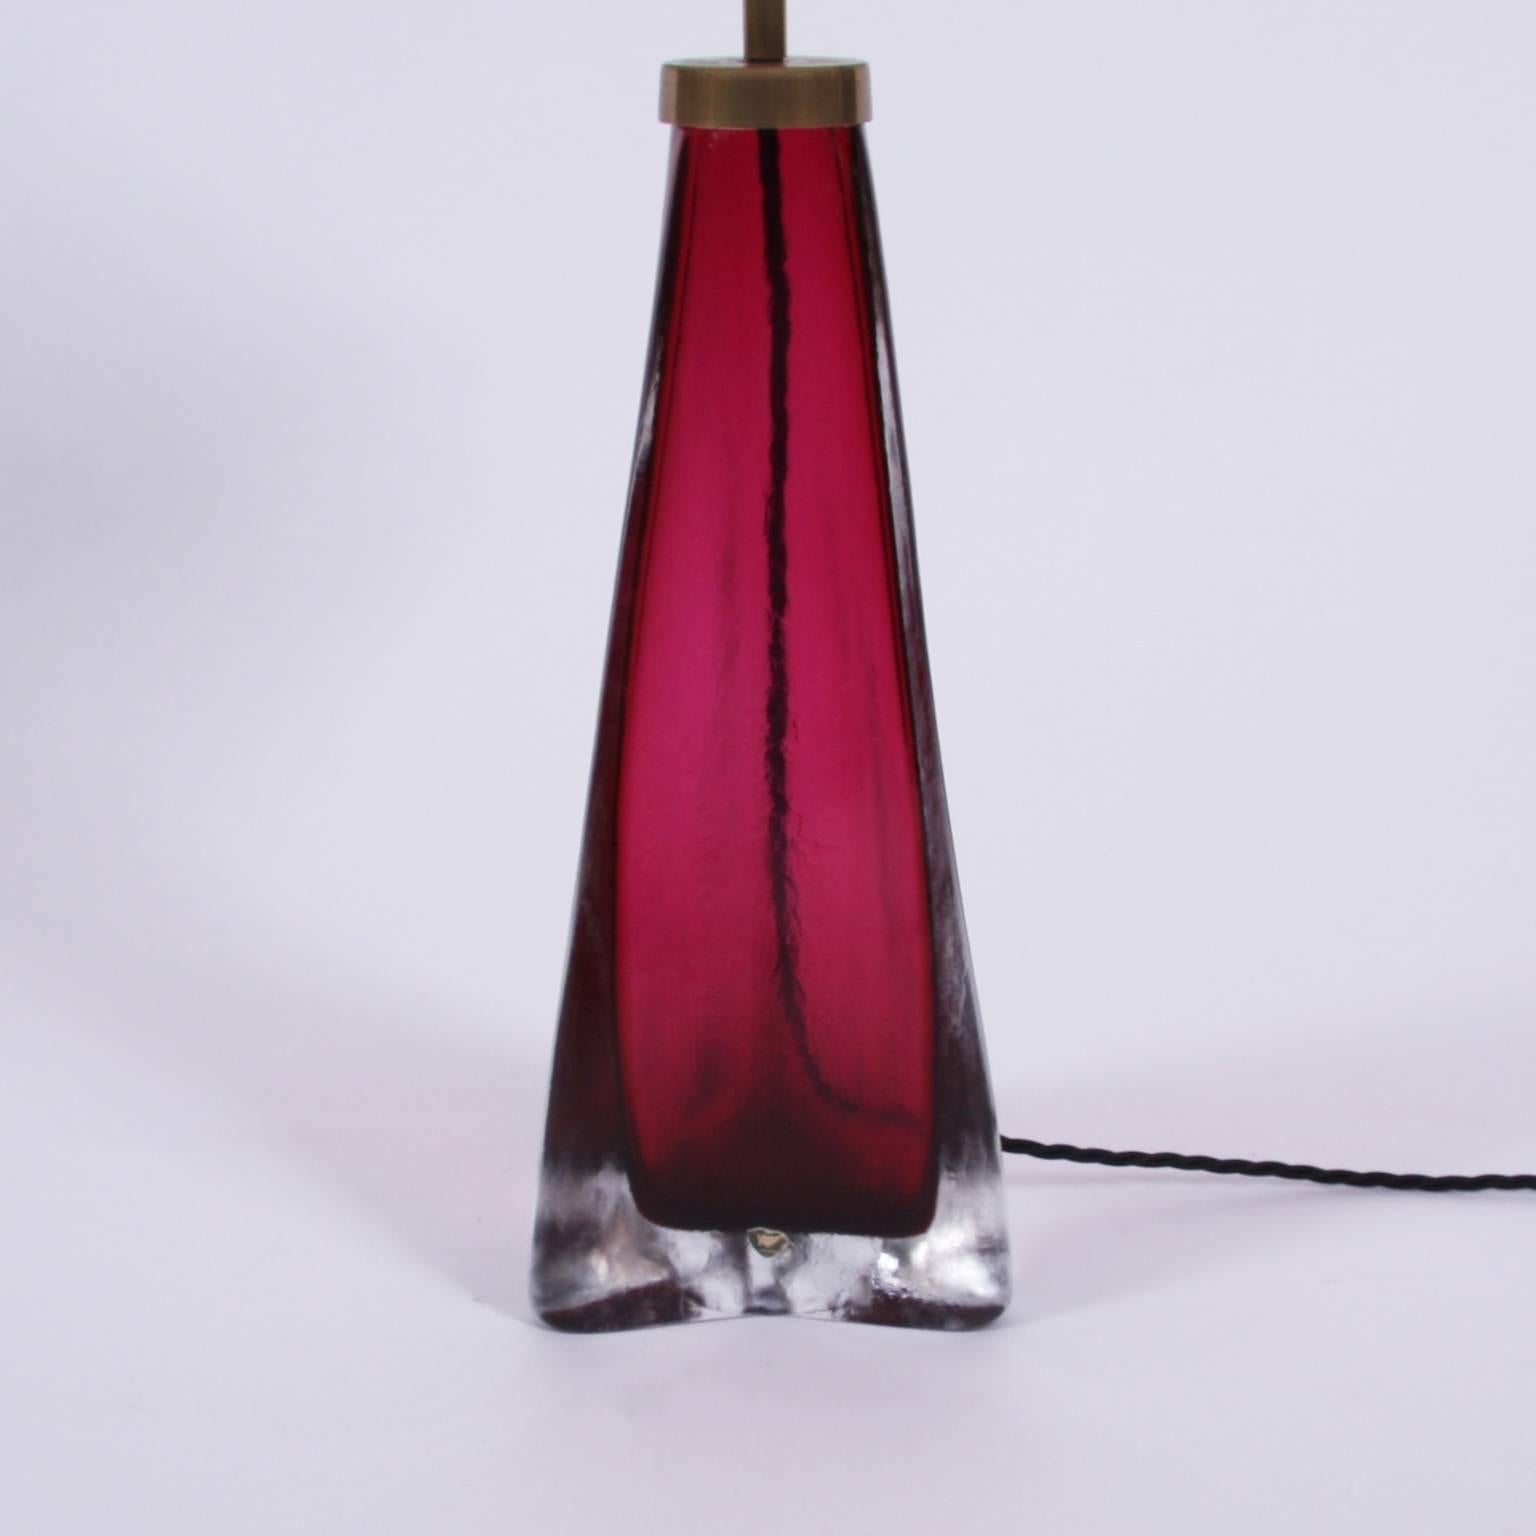 Swedish circa 1950

A pair of glass table lamps, by Orrefors, in a lovely cranberry color with triangular shape. Stamped with maker's name. 

Pictured with bespoke, handmade, shades. 

Rewired and PAT tested.